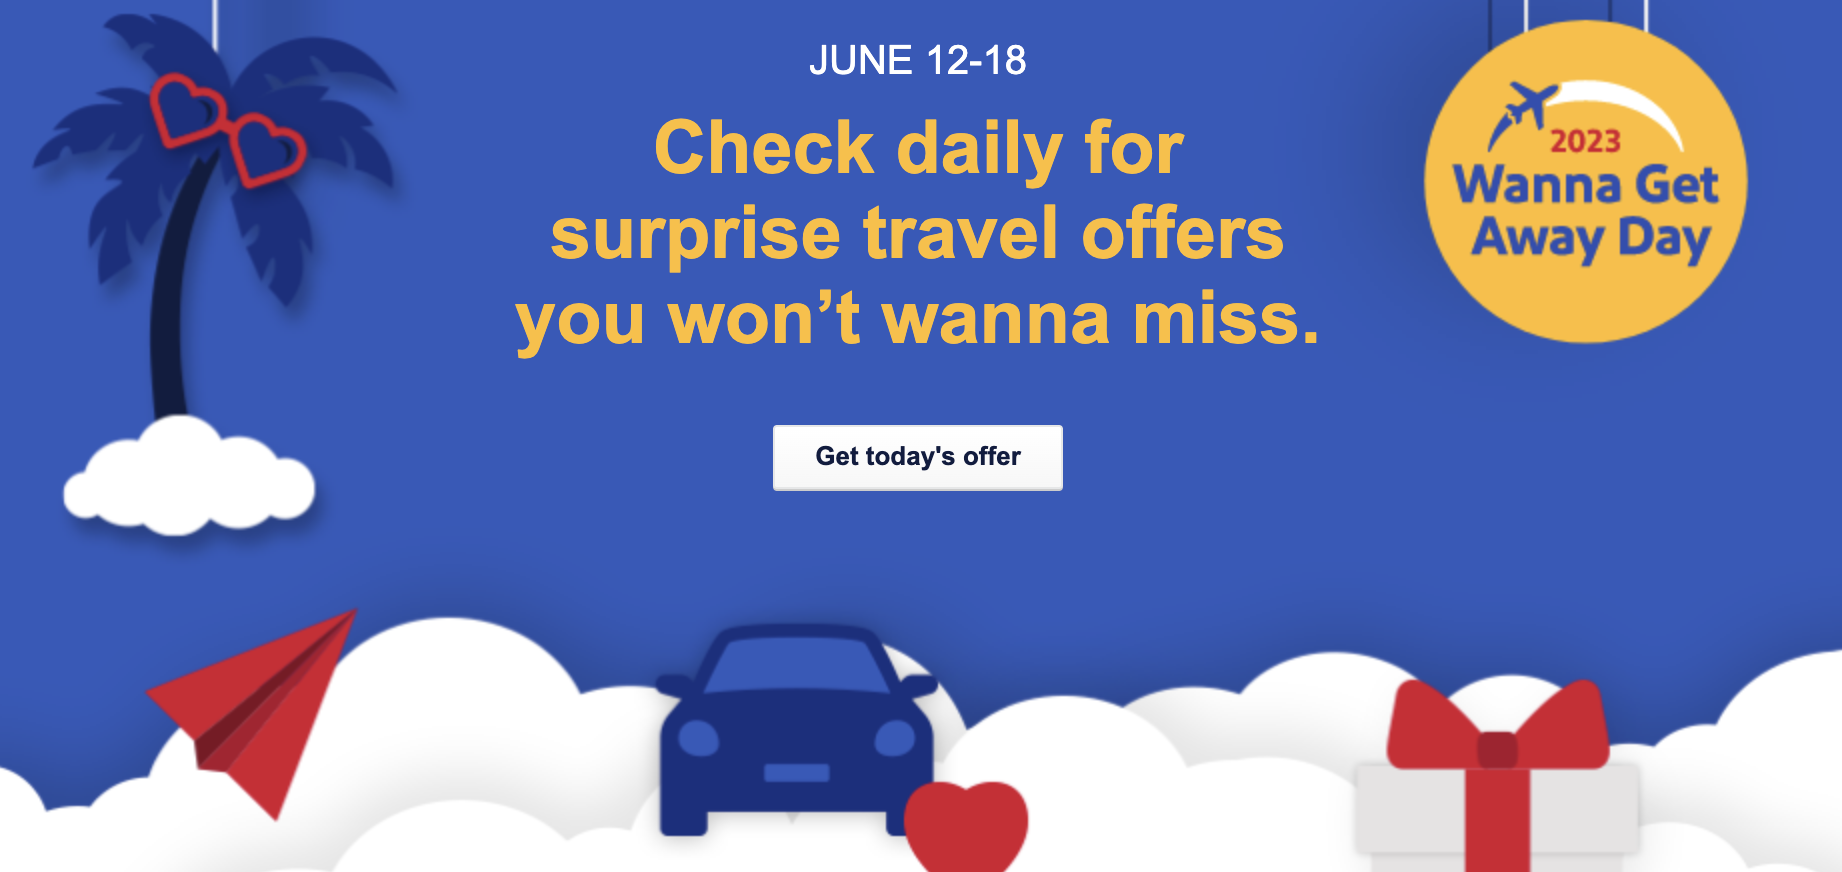 You are currently viewing Southwest Wanna Get Away Day sweepstakes: Earn bonus points, discounted flights and more this week only